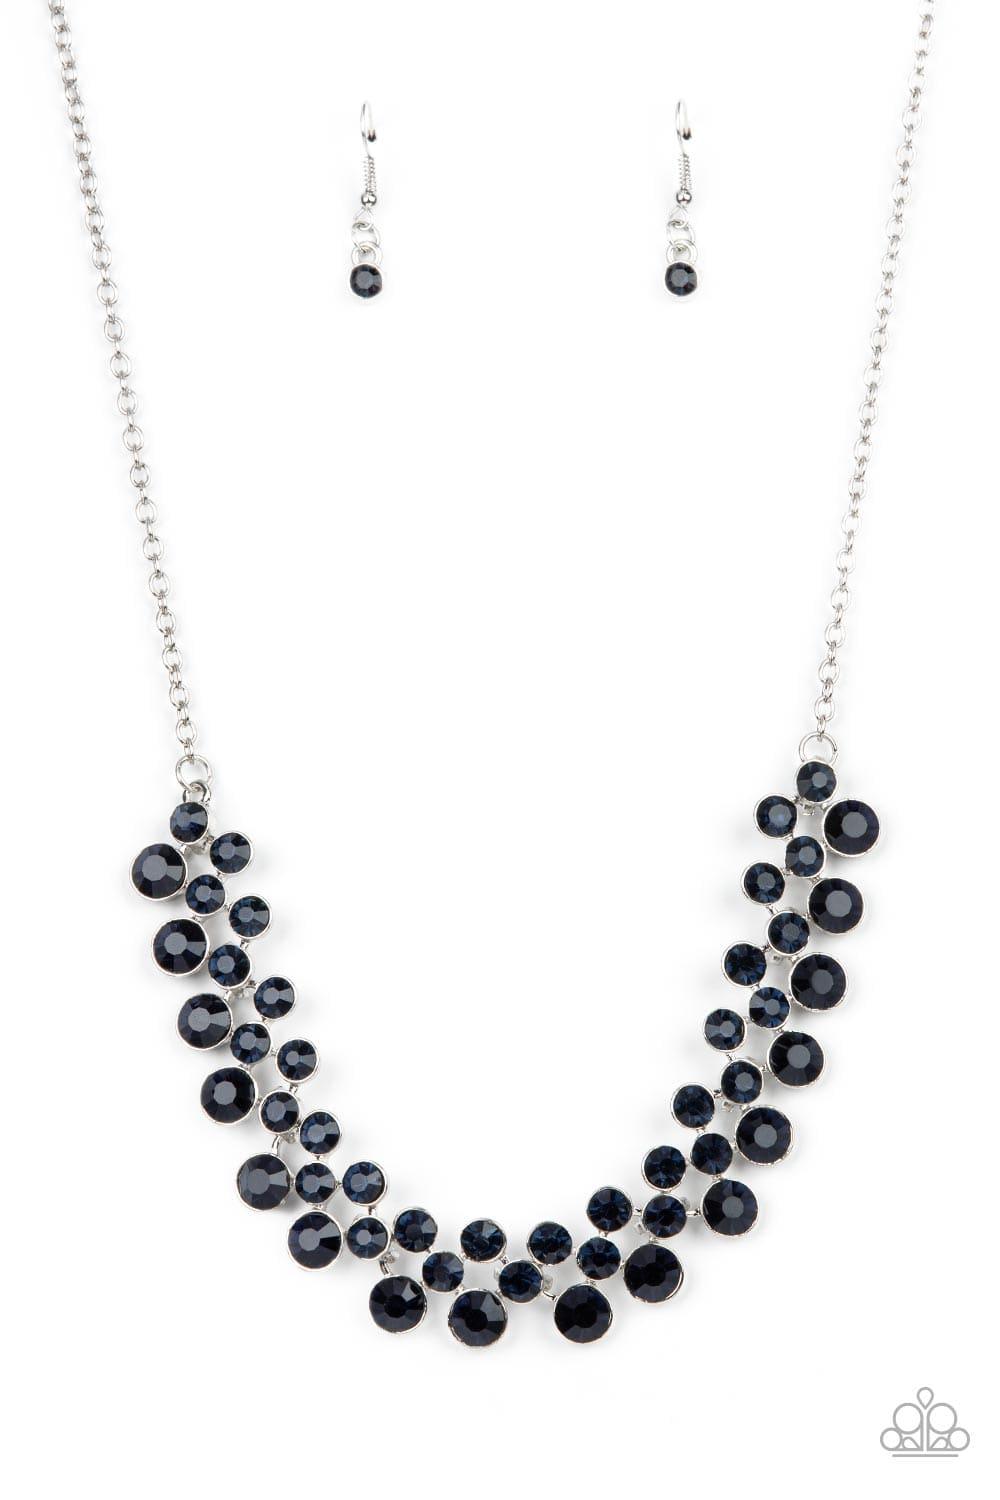 Paparazzi Accessories - Won The Lottery - Blue Necklace - Bling by JessieK